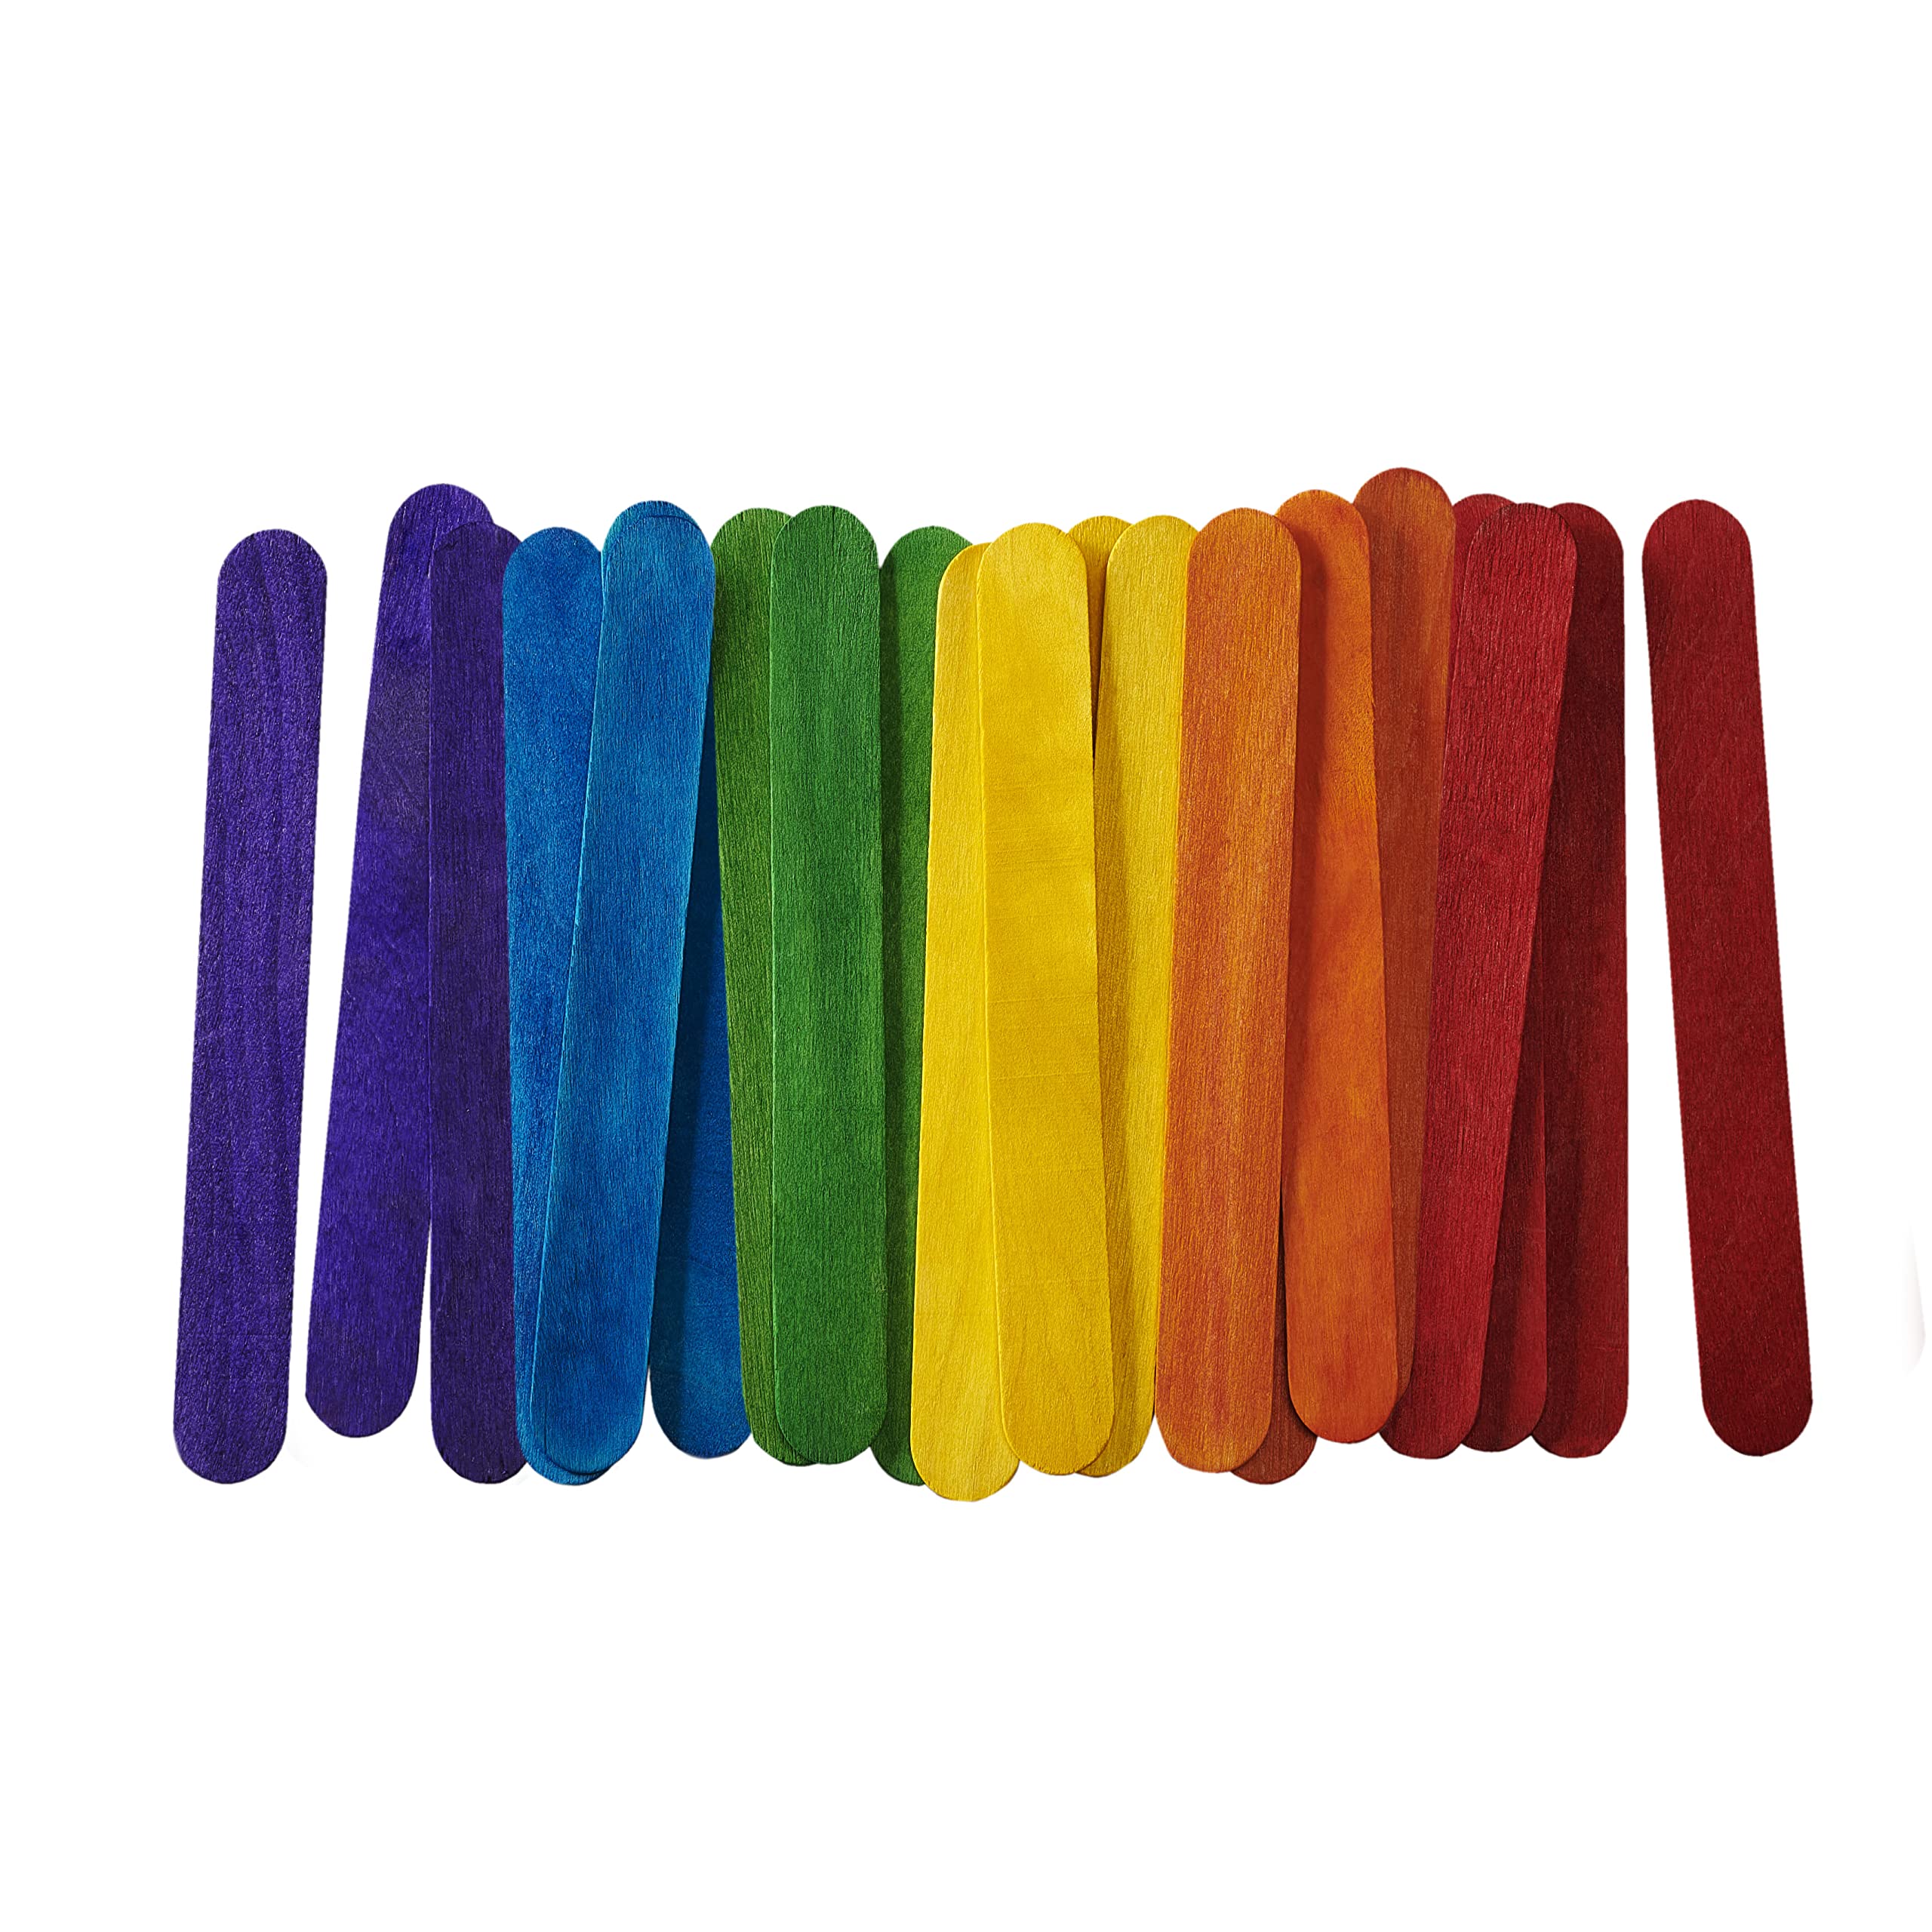 Colored Popsicle Sticks for Crafts - 100 Count 6 Inch Jumbo Multi-Purpose Wooden  Sticks